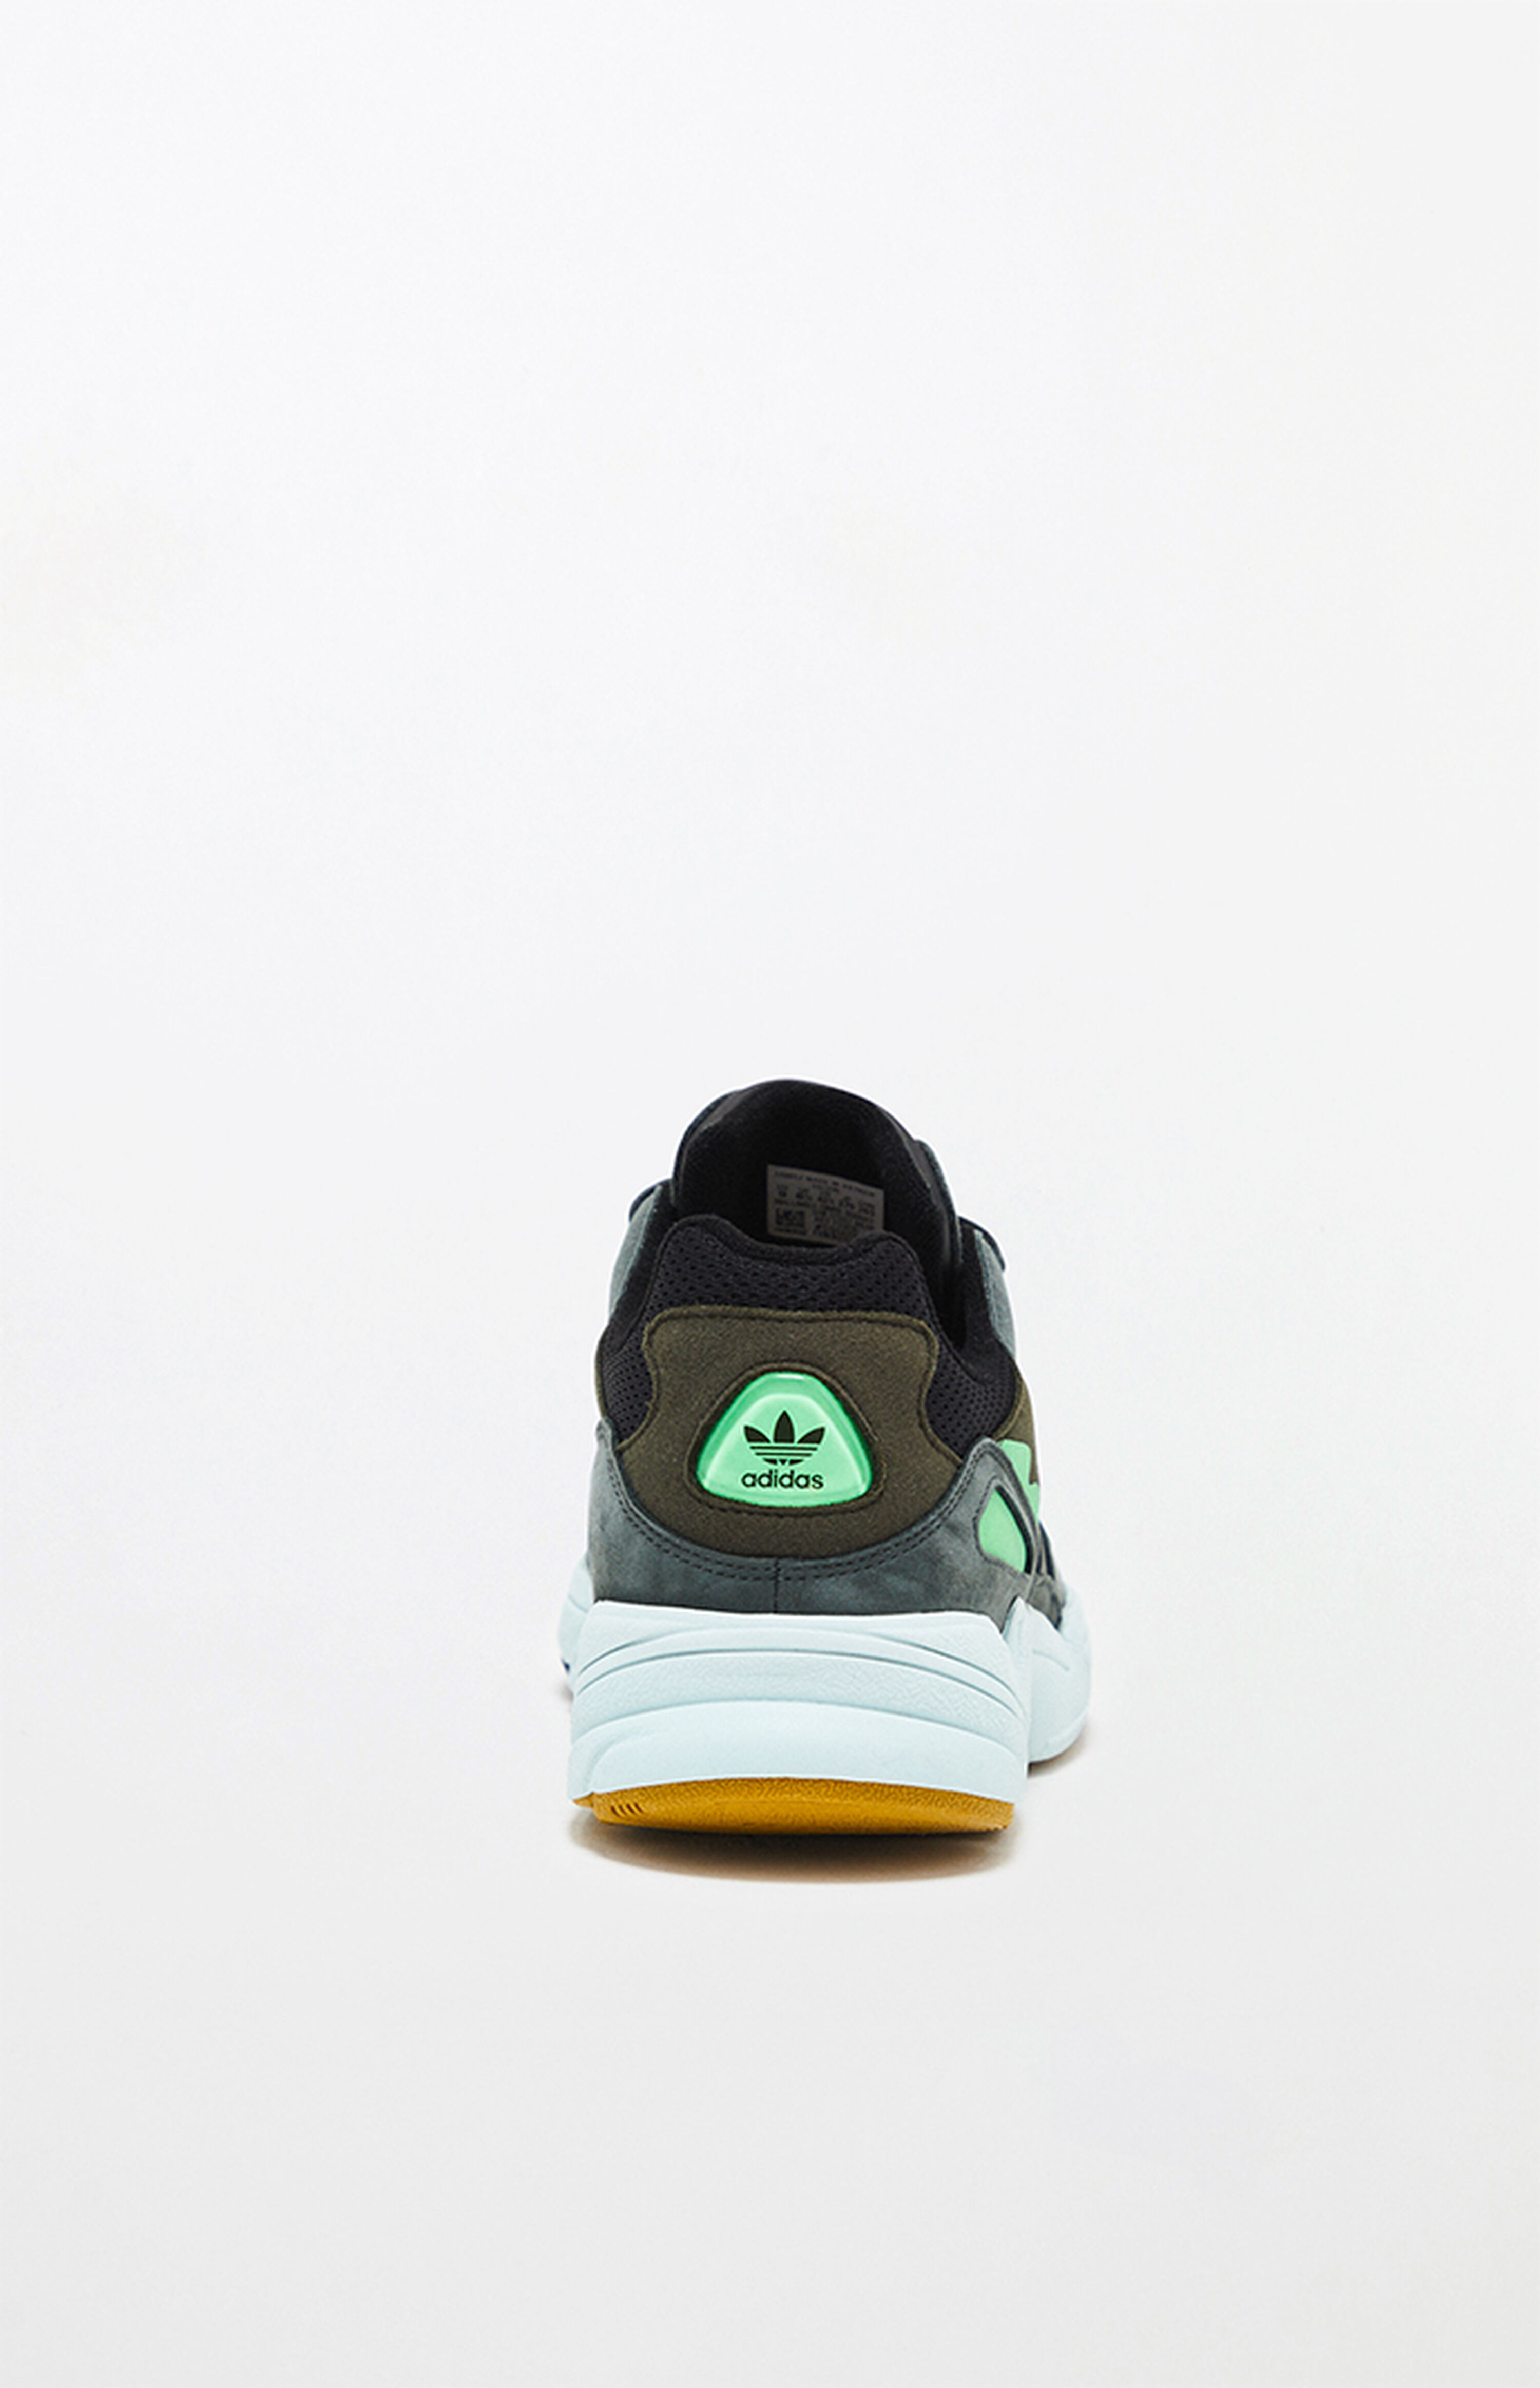 adidas Black and Green Yung-96 Shoes | PacSun | PacSun